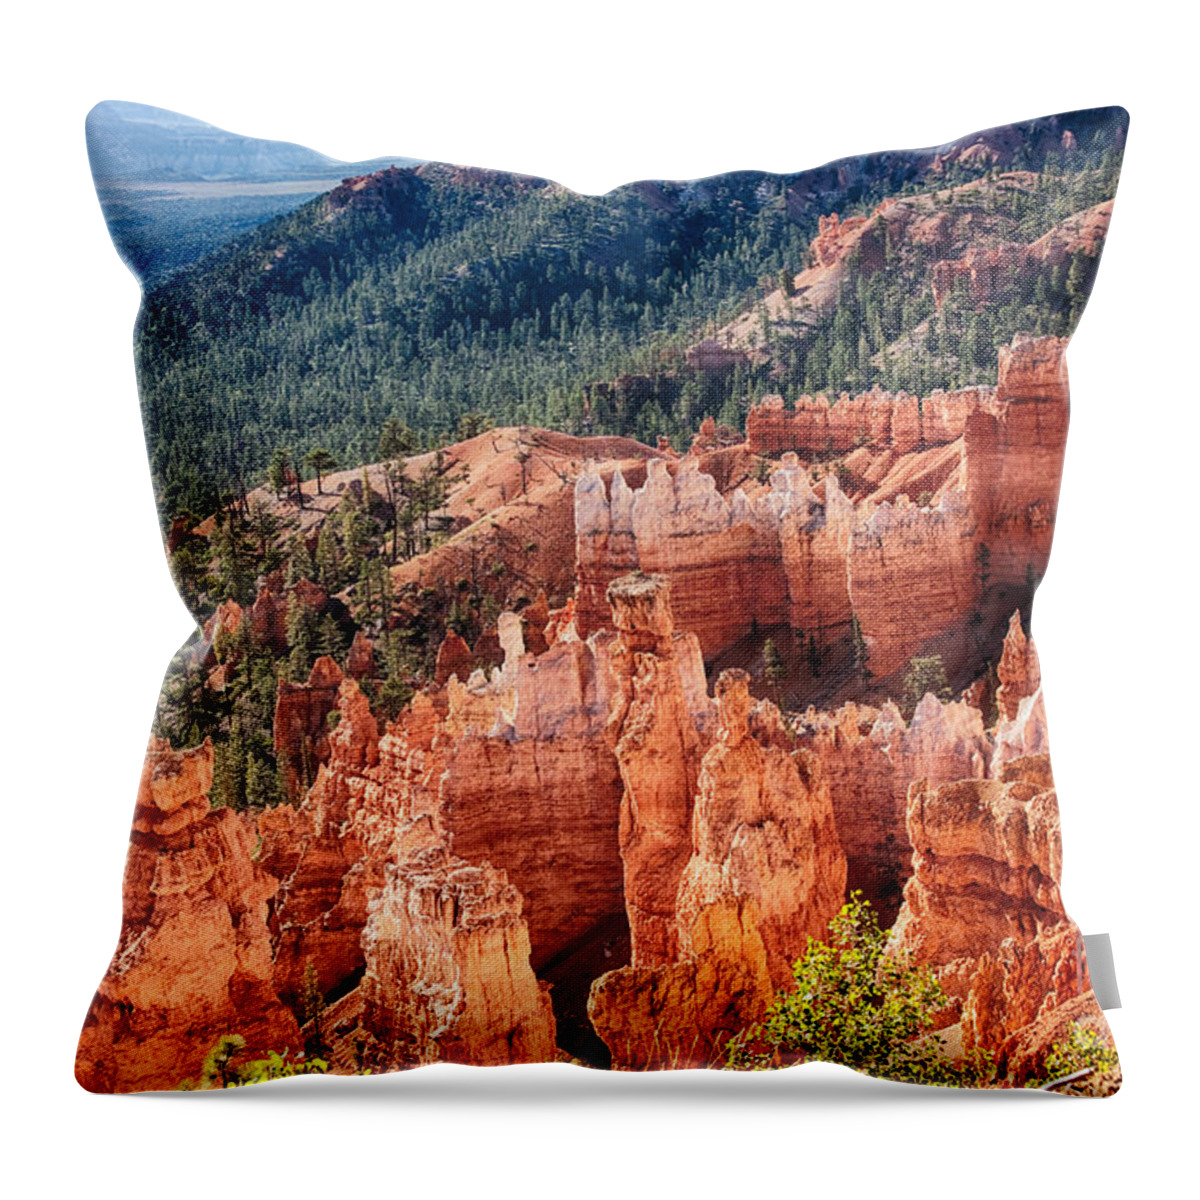 Bryce Canyon Throw Pillow featuring the photograph Bryce Canyon Utah Views 24 by James BO Insogna